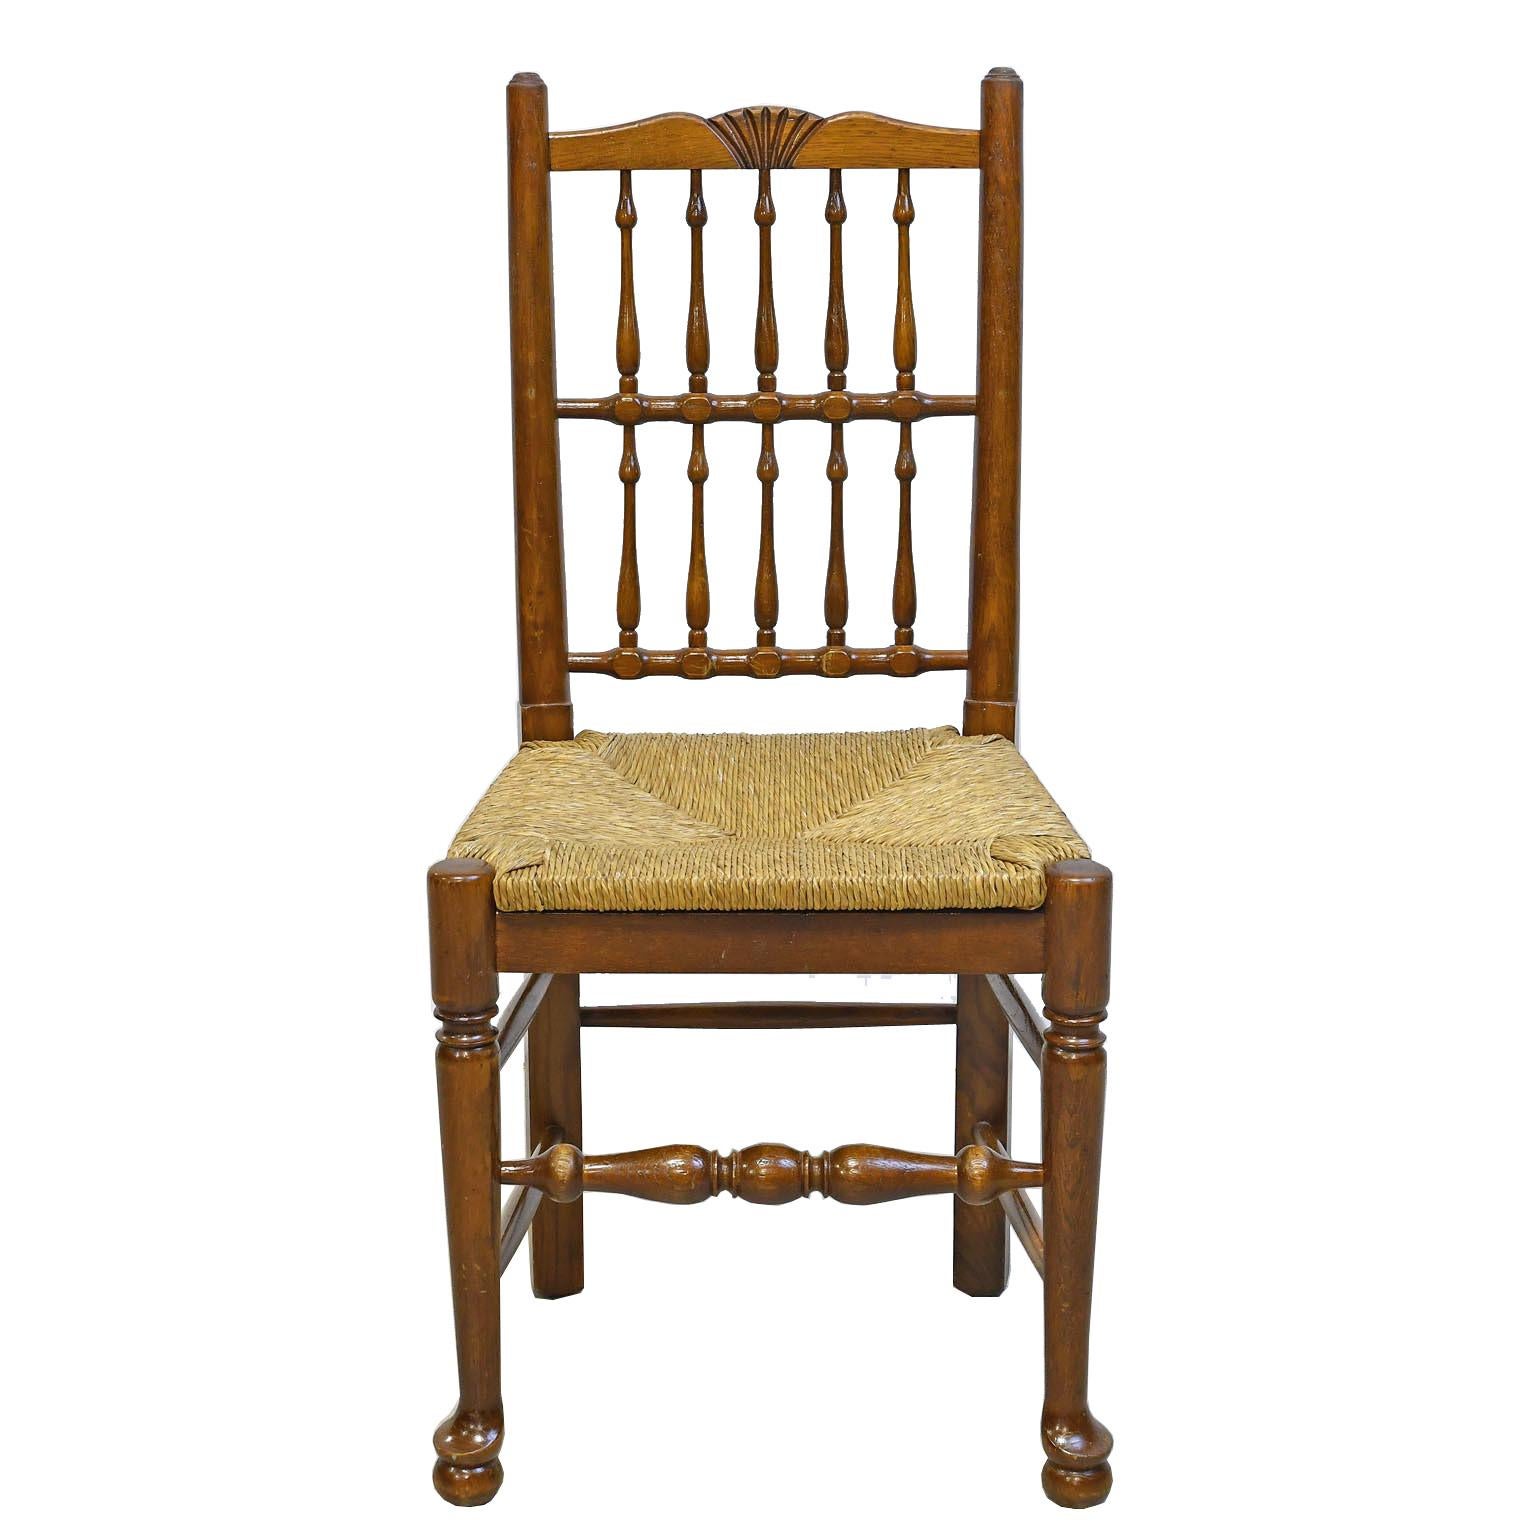 Set of 8 English oak country dining chairs with rush seats about 25 years old. Very well constructed and in good condition two arms and 6 sides, manufactured in England.
Side chair 19